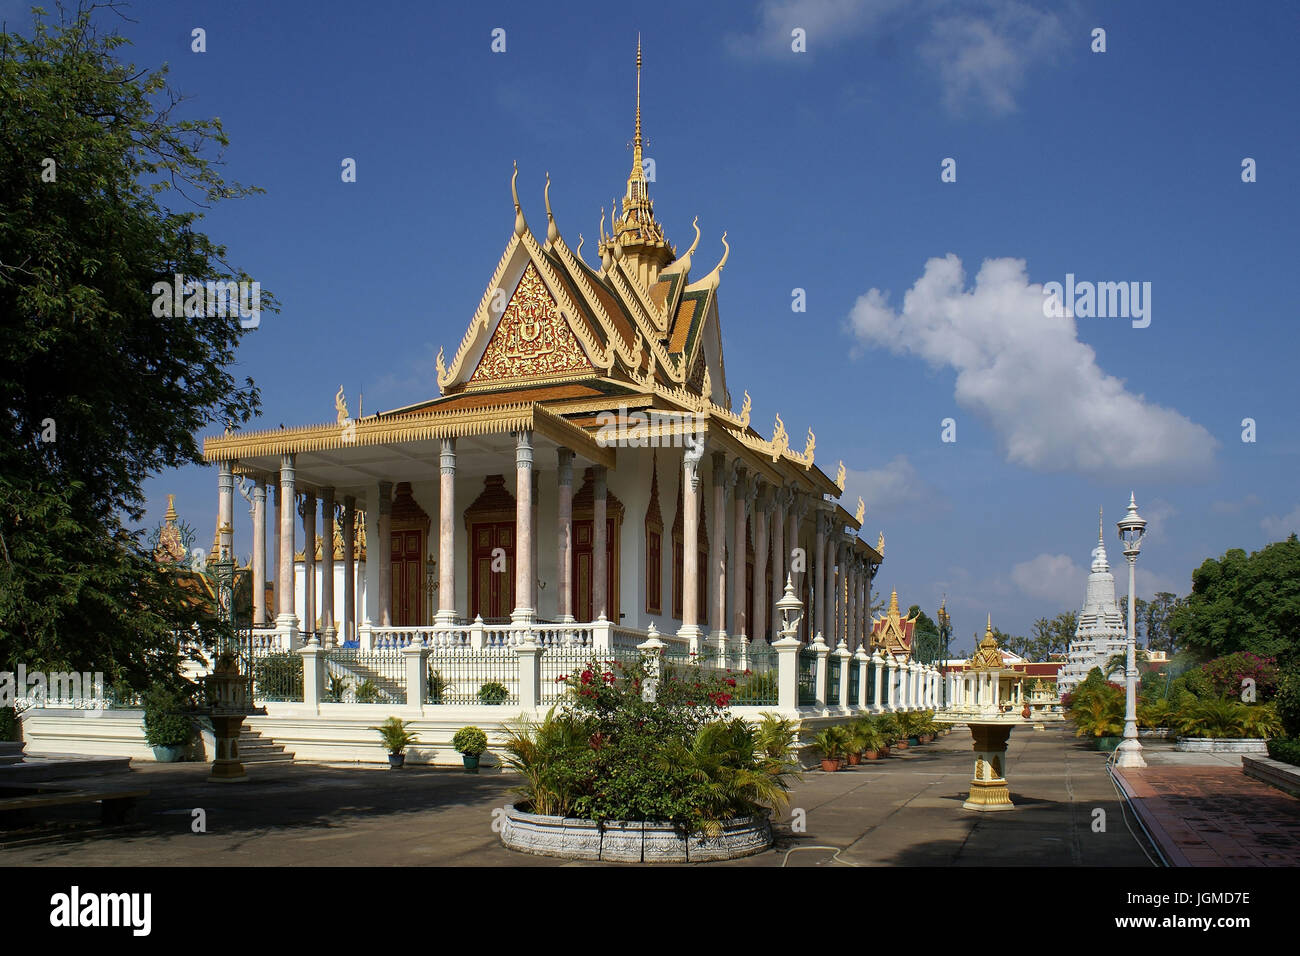 The Silver Pagoda, The silver pagoda in Pnom Penh, Die silberne Pagode in Pnom Penh Stock Photo